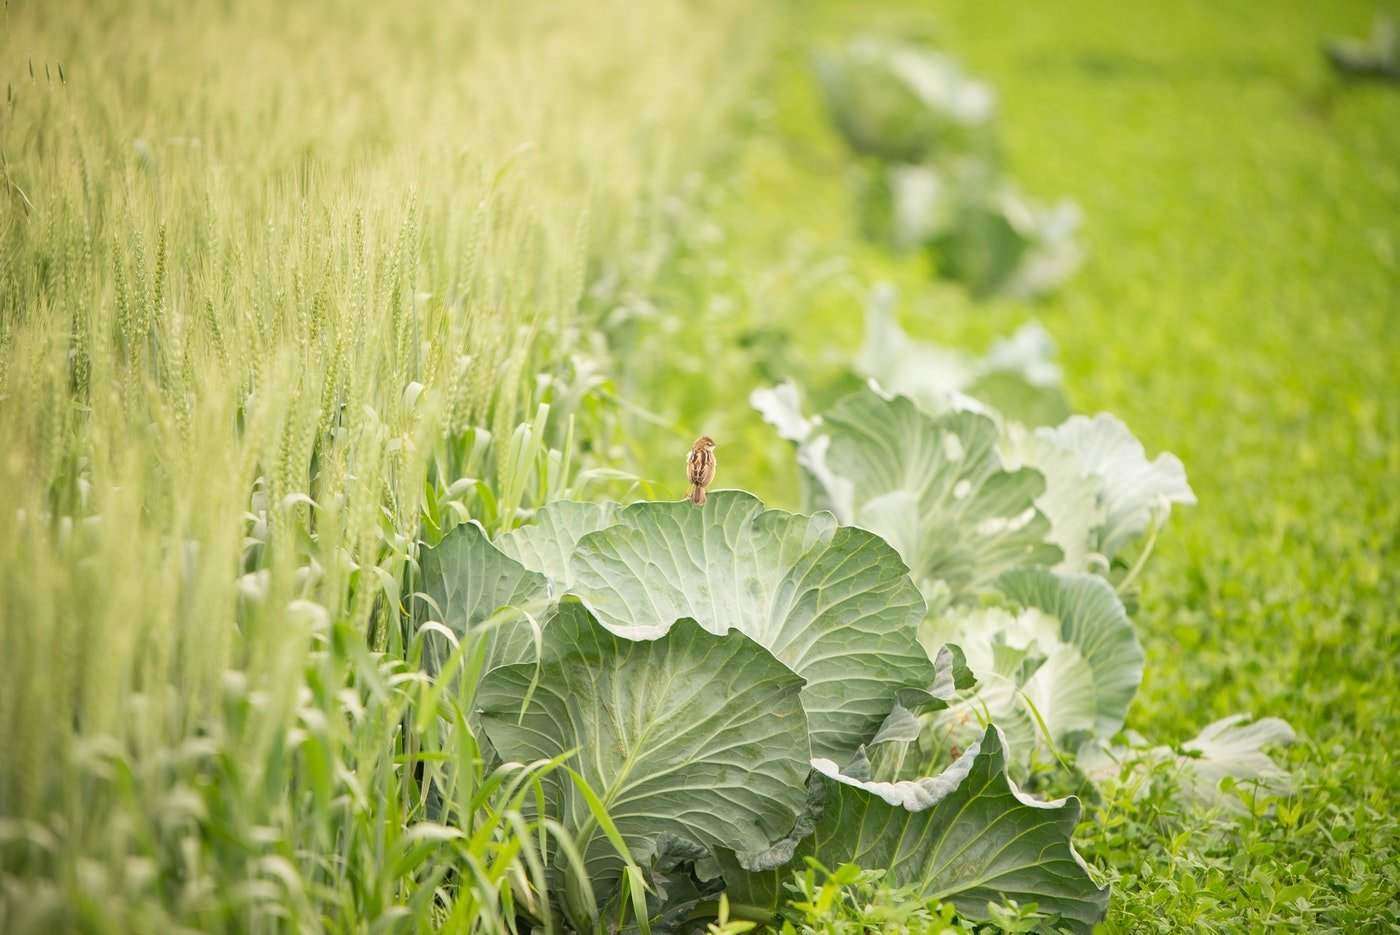 cabbages and wheat - how to create a sustainable eco-garden